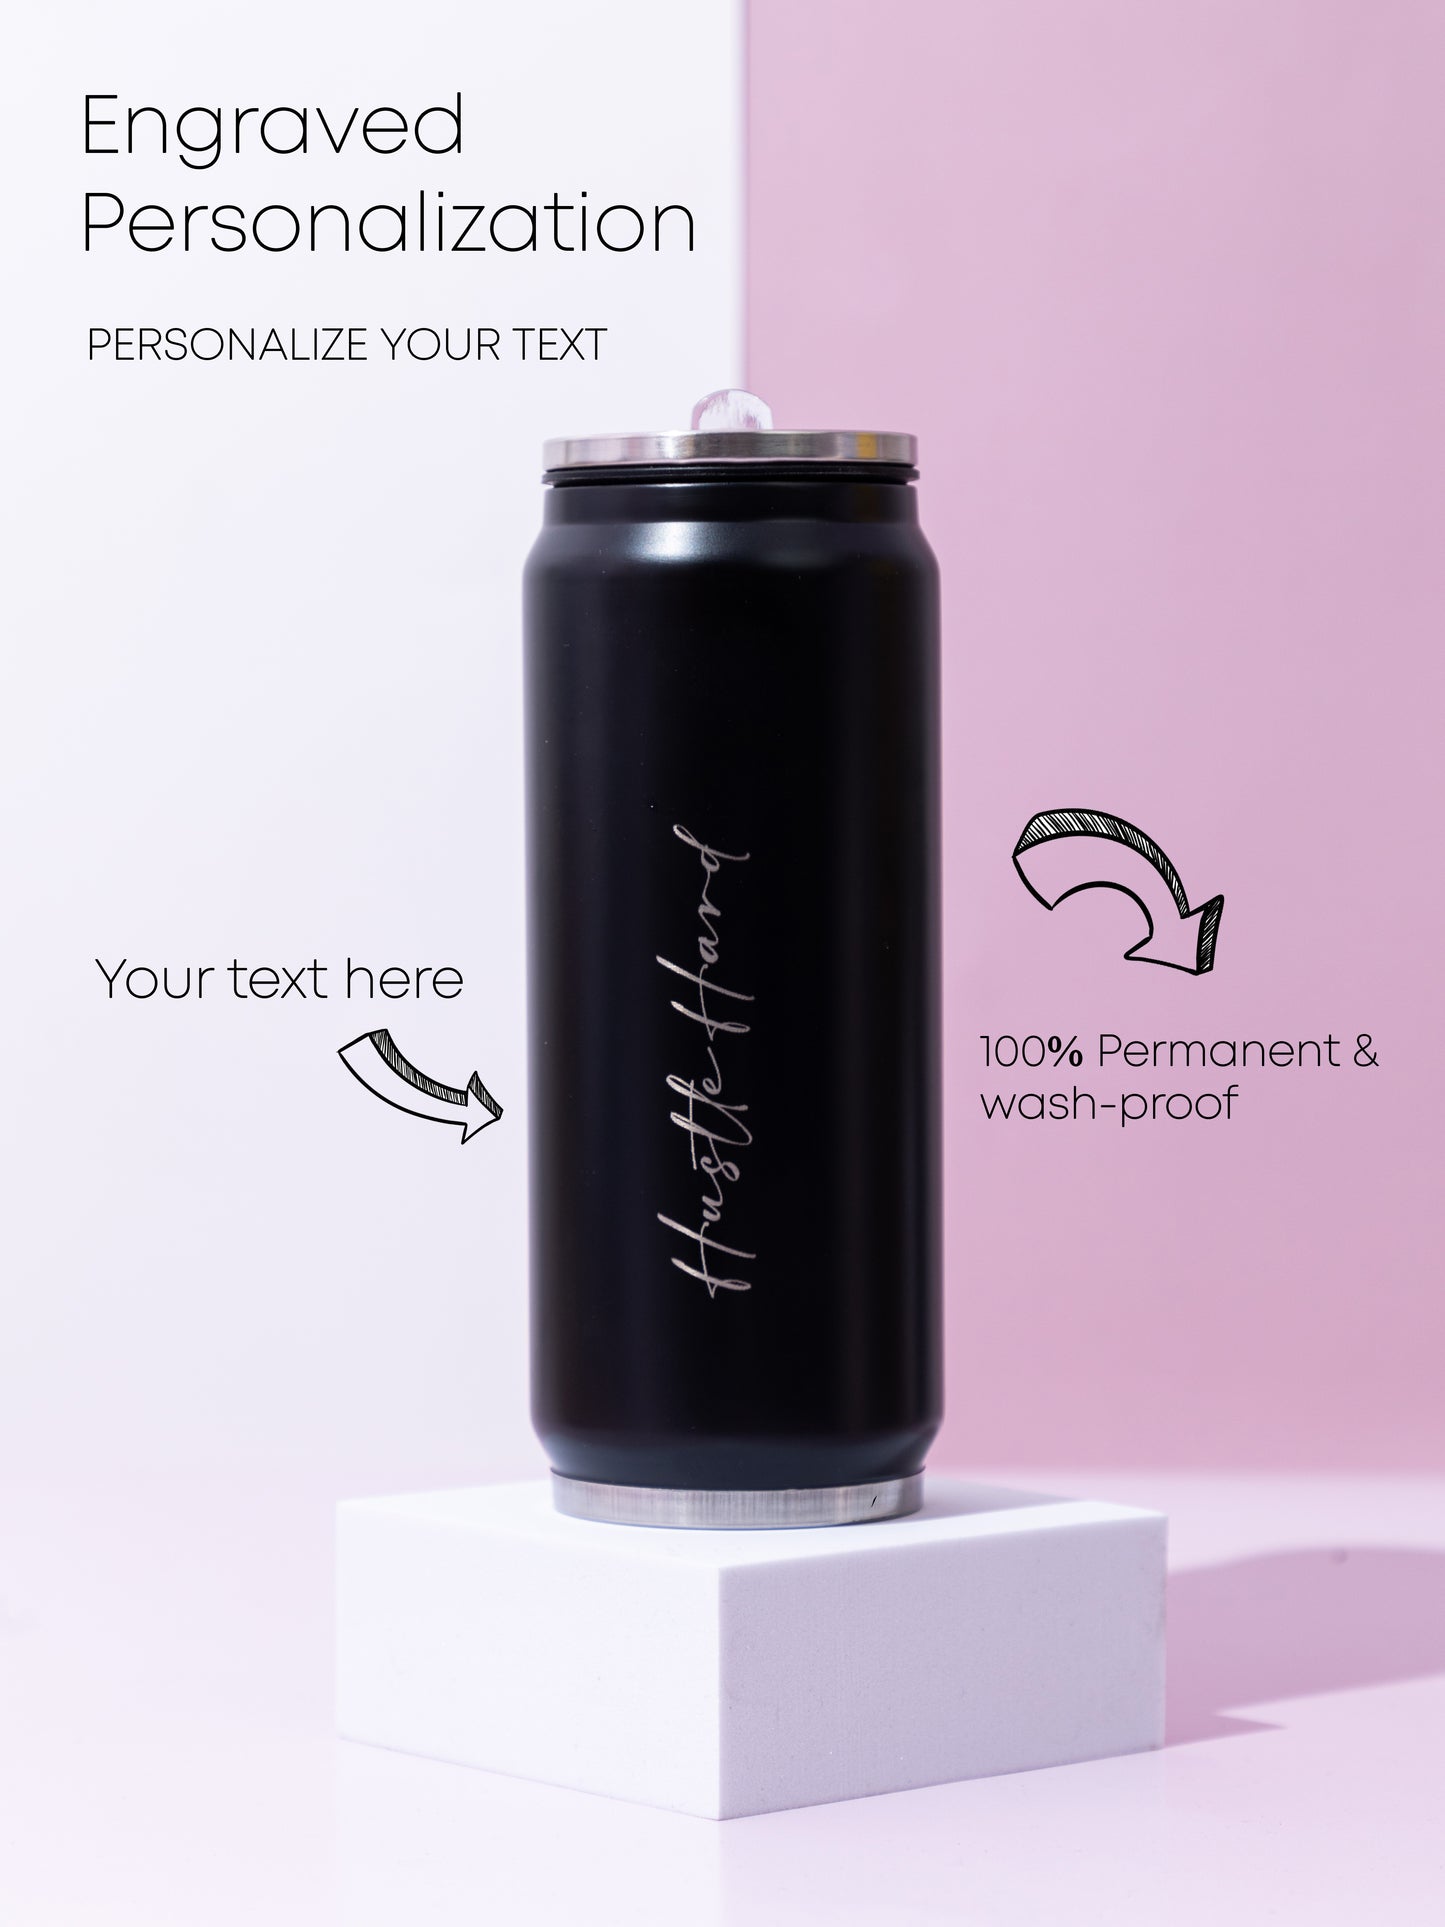 Personalized Name/Quote Metal Can Sippers 500ml